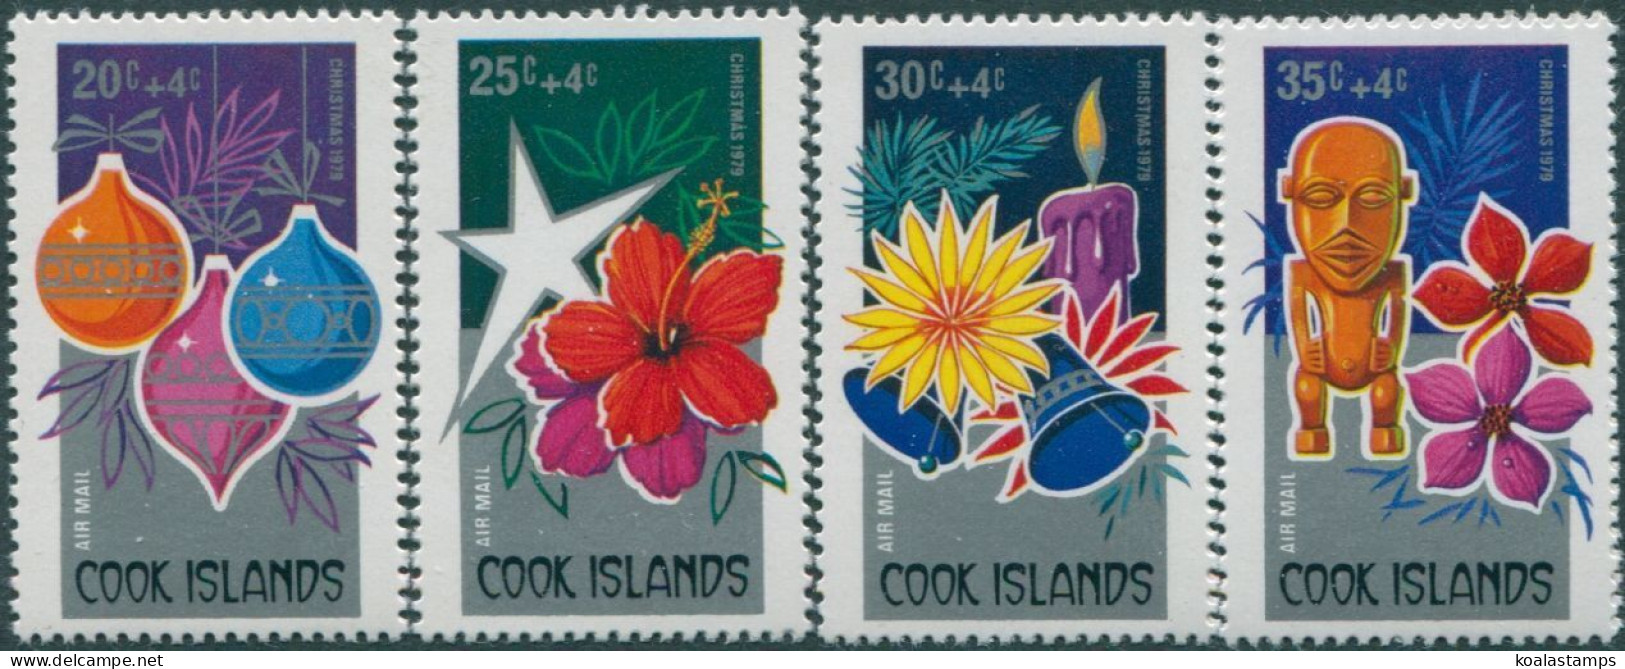 Cook Islands 1979 SG671-674 Christmas Airmail Surcharges Set MNH - Cookinseln